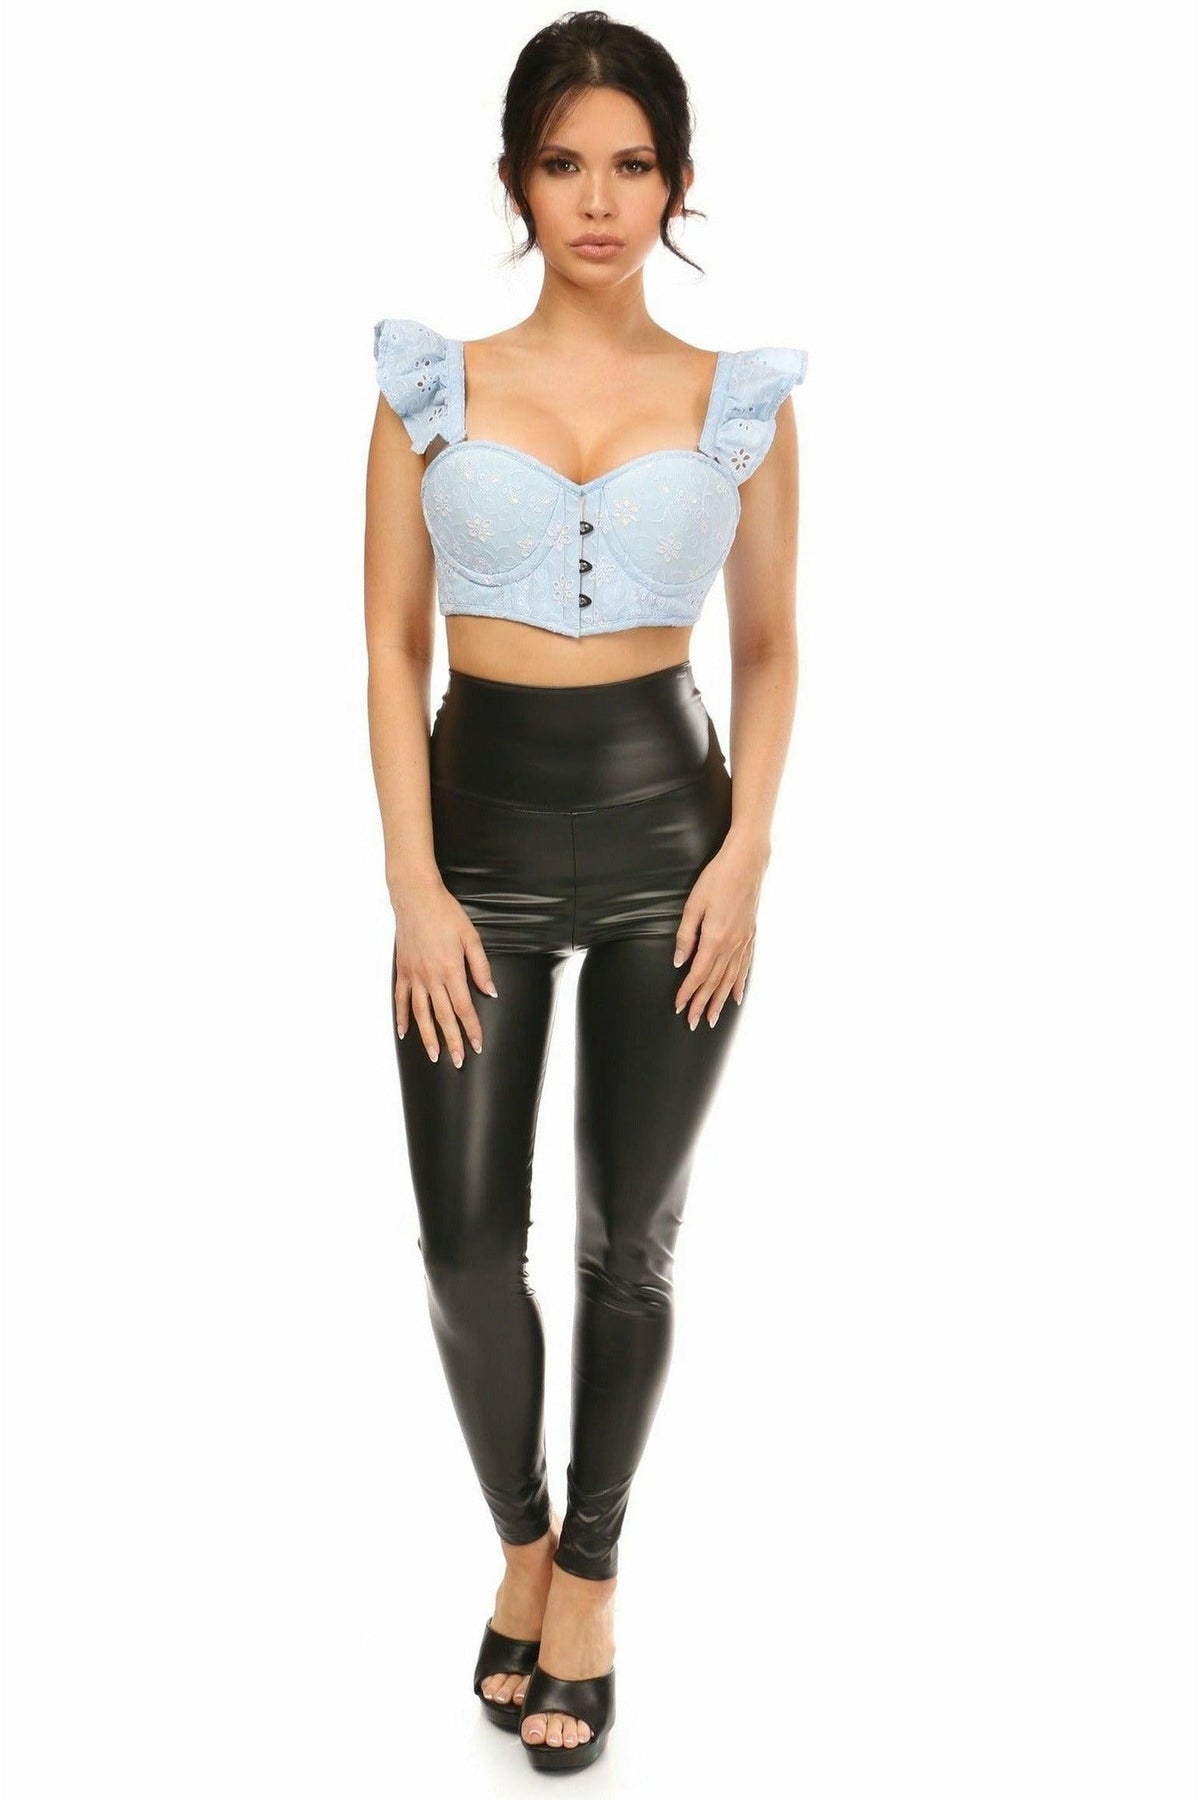 Lavish Lt Blue Eyelet Underwire Bustier Top w/Removable Ruffle Sleeves-Daisy Corsets